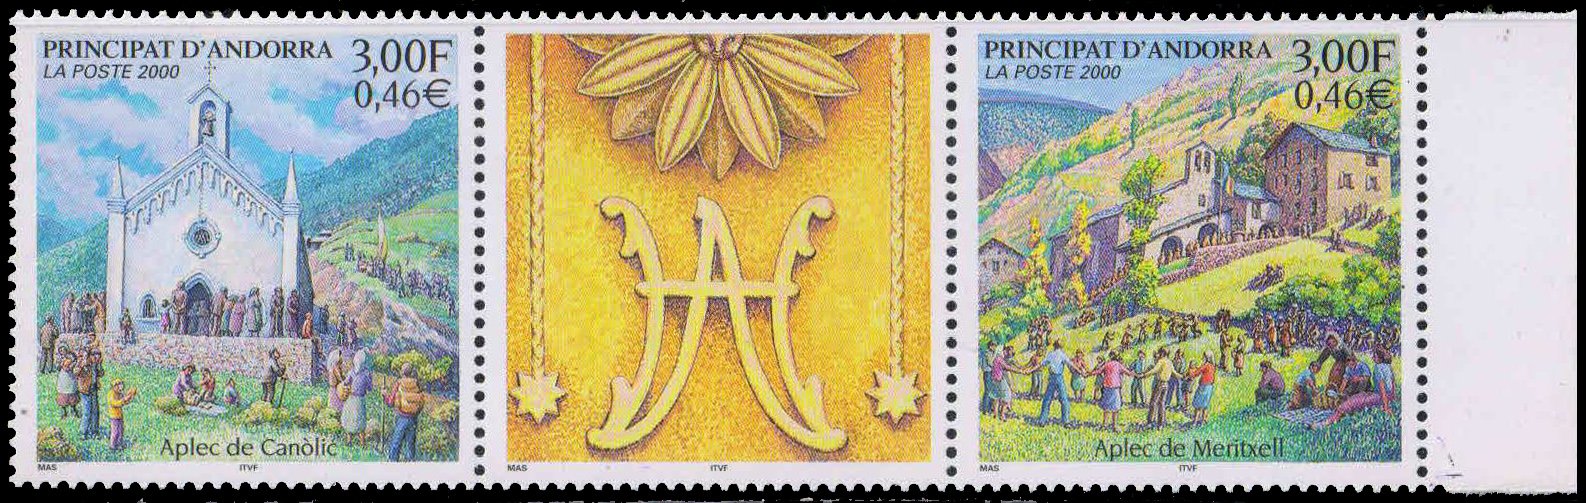 ANDORRA (French) 2000-Church (Canolich Festival) Our lady Chapel (Meritxell Festival), Set of 2 Stamps, MNH, S.G. F569-70-Cat £ 5.50